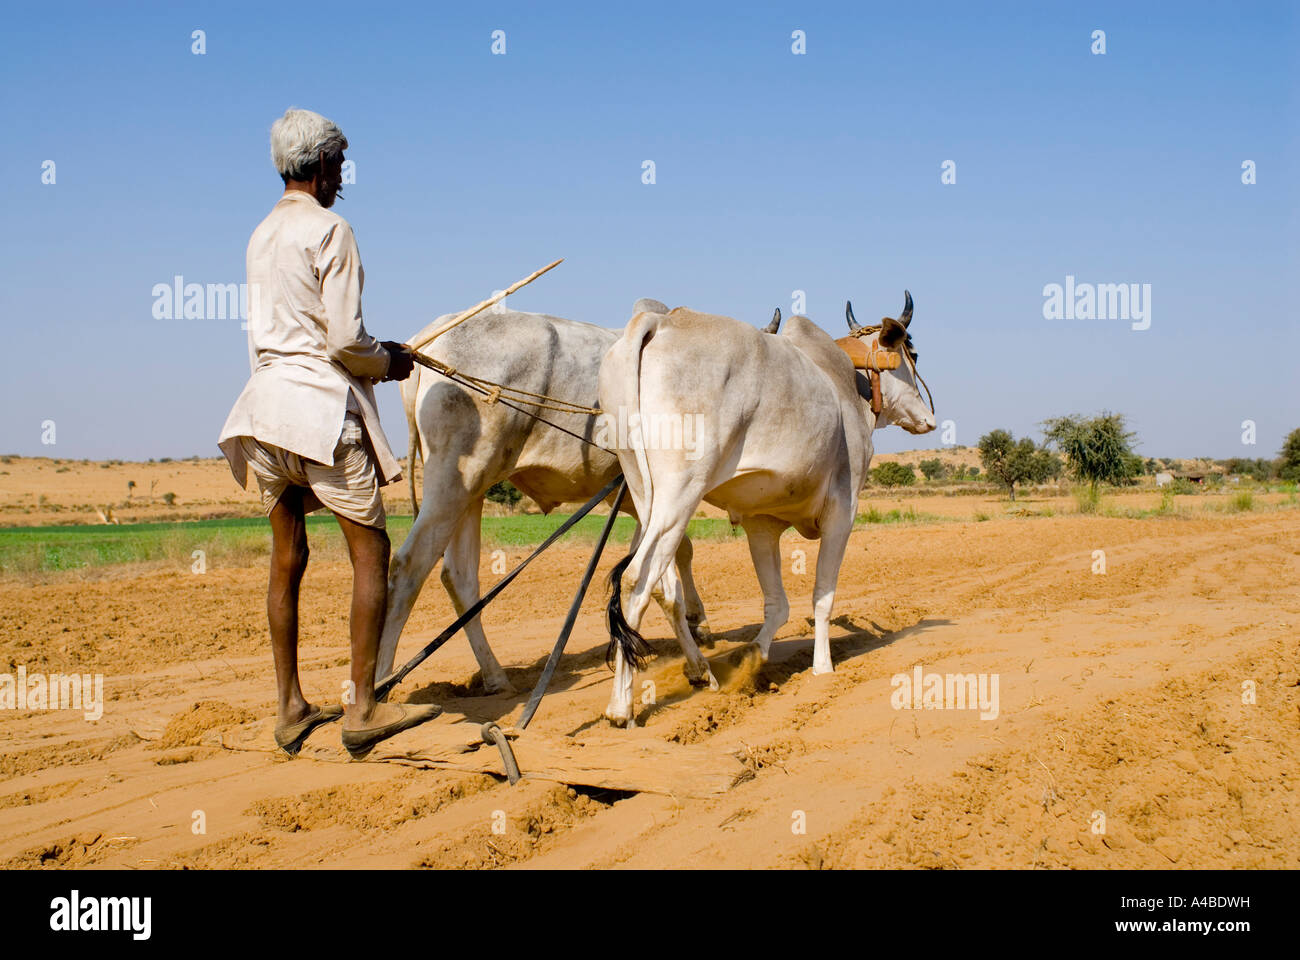 Stock image of Rajasthan farmer plowing field with oxen near Pushkar Stock Photo